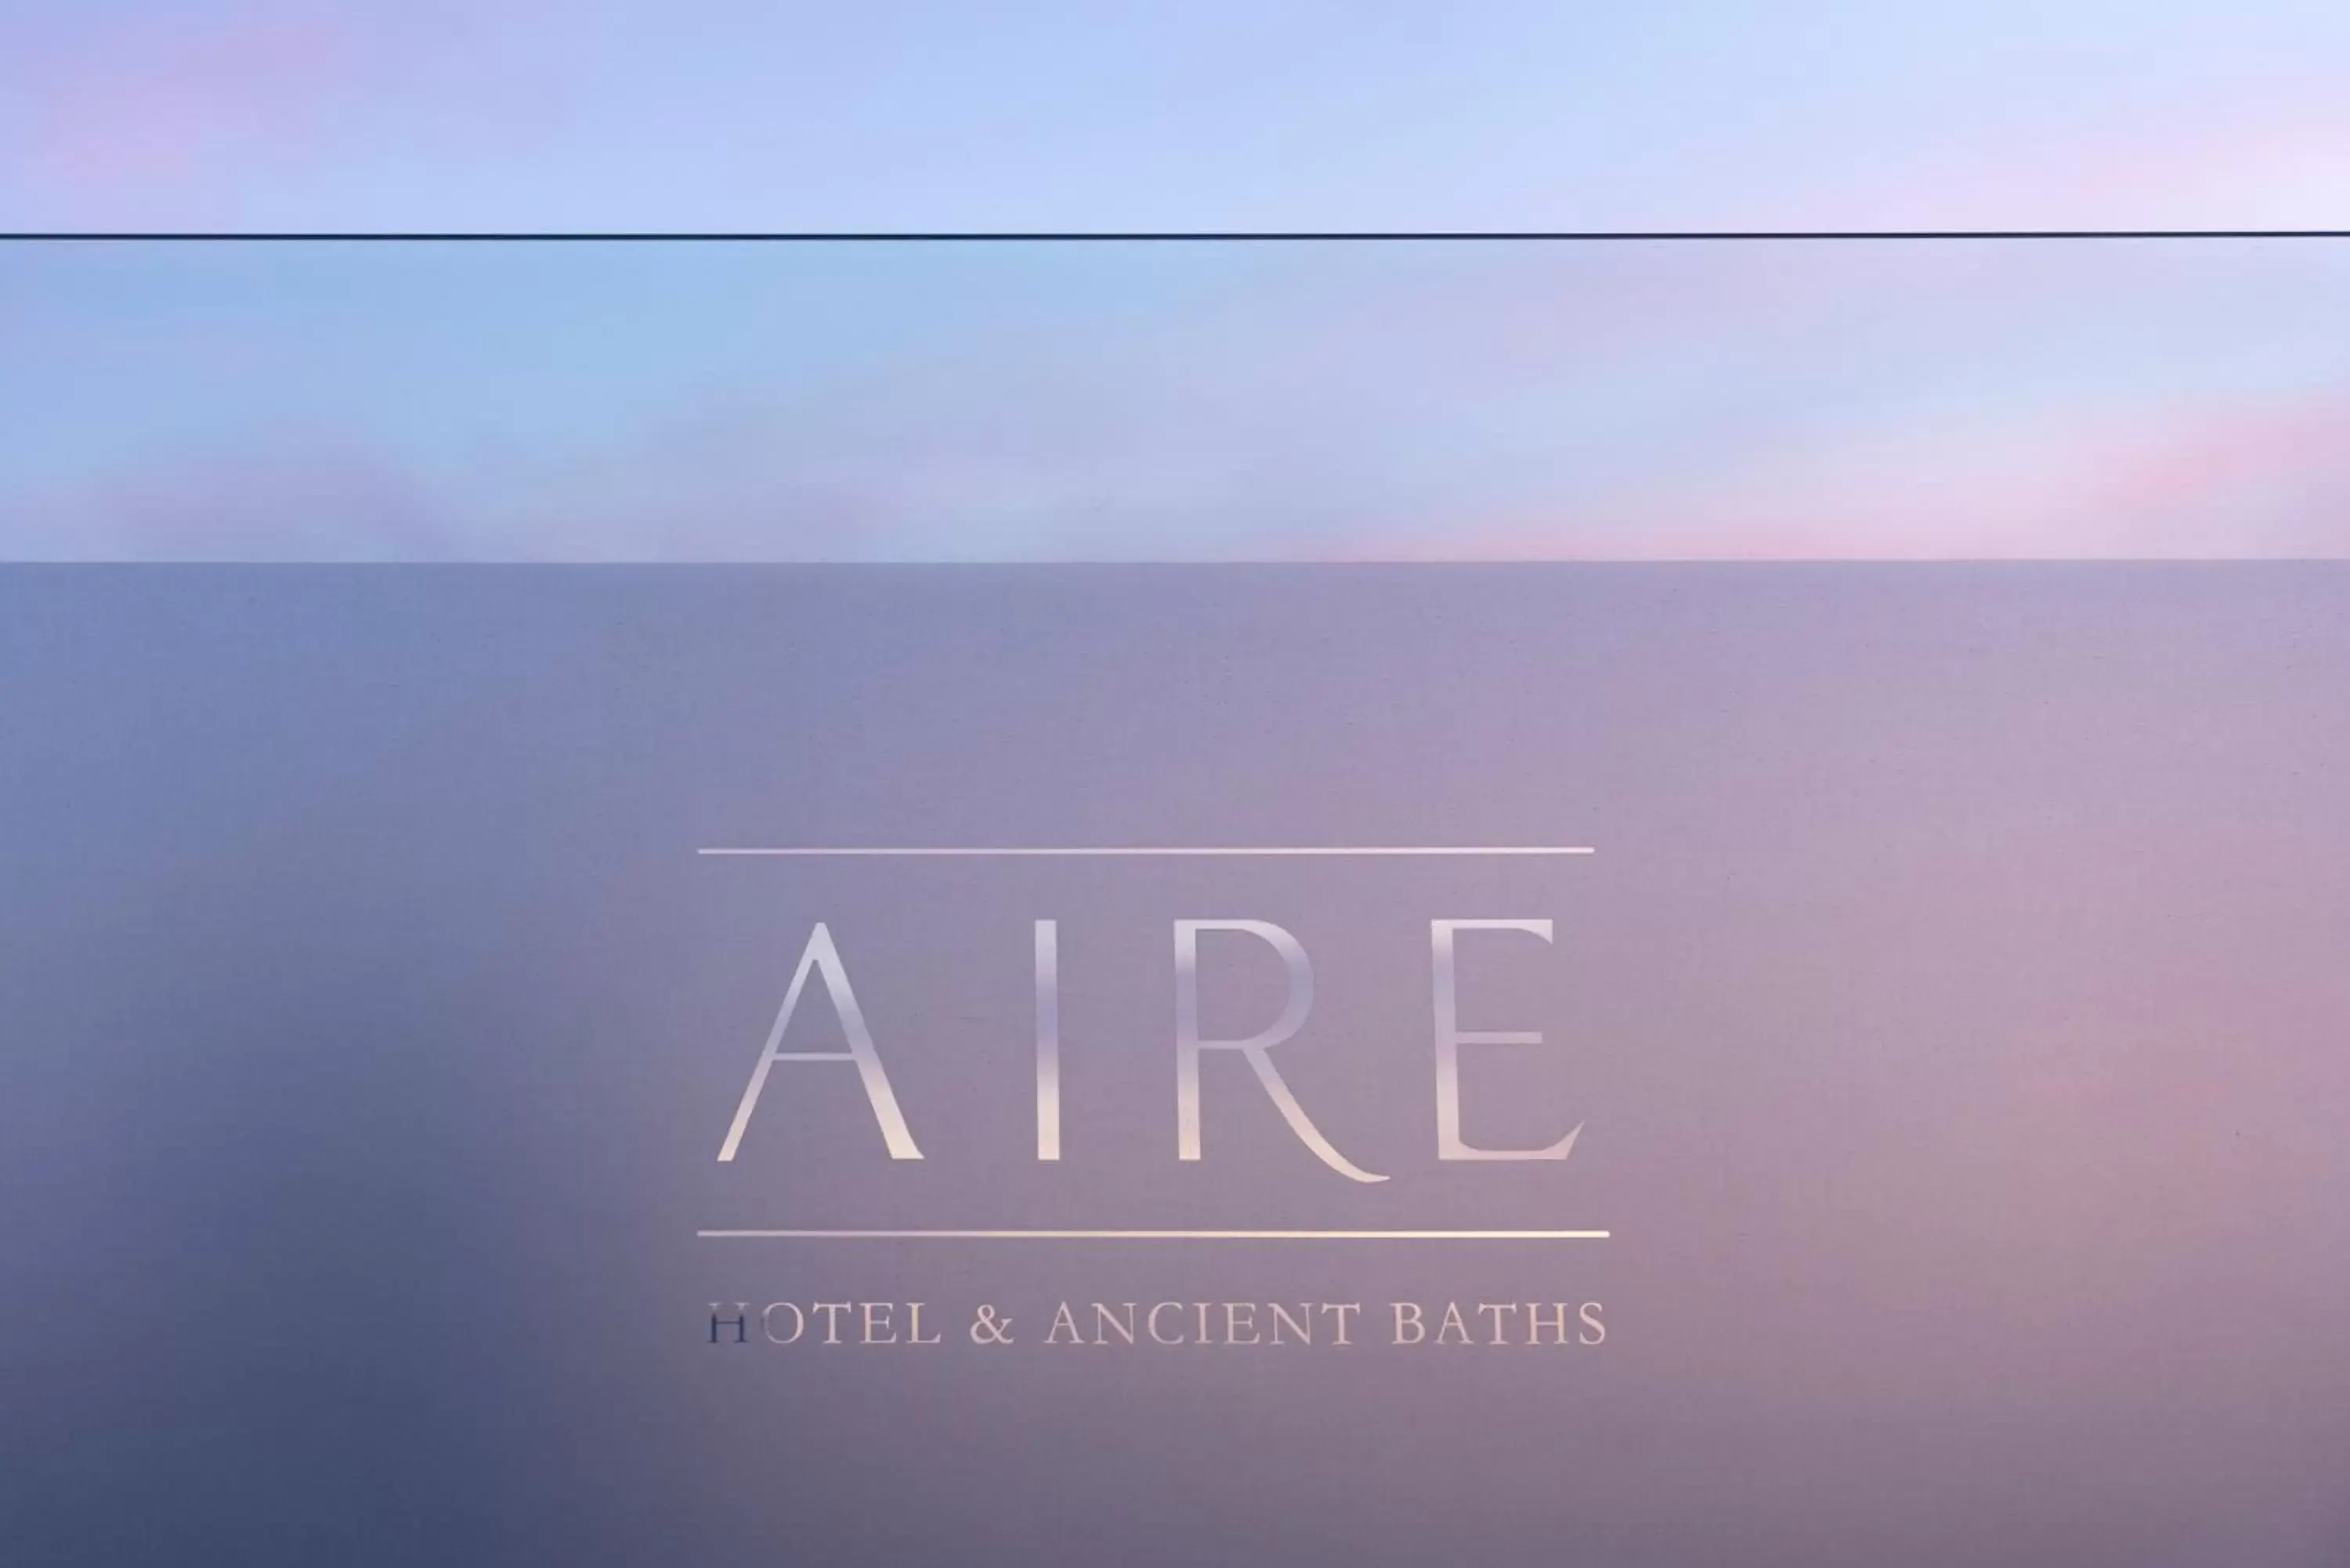 Property logo or sign in Aire Hotel & Ancient Baths